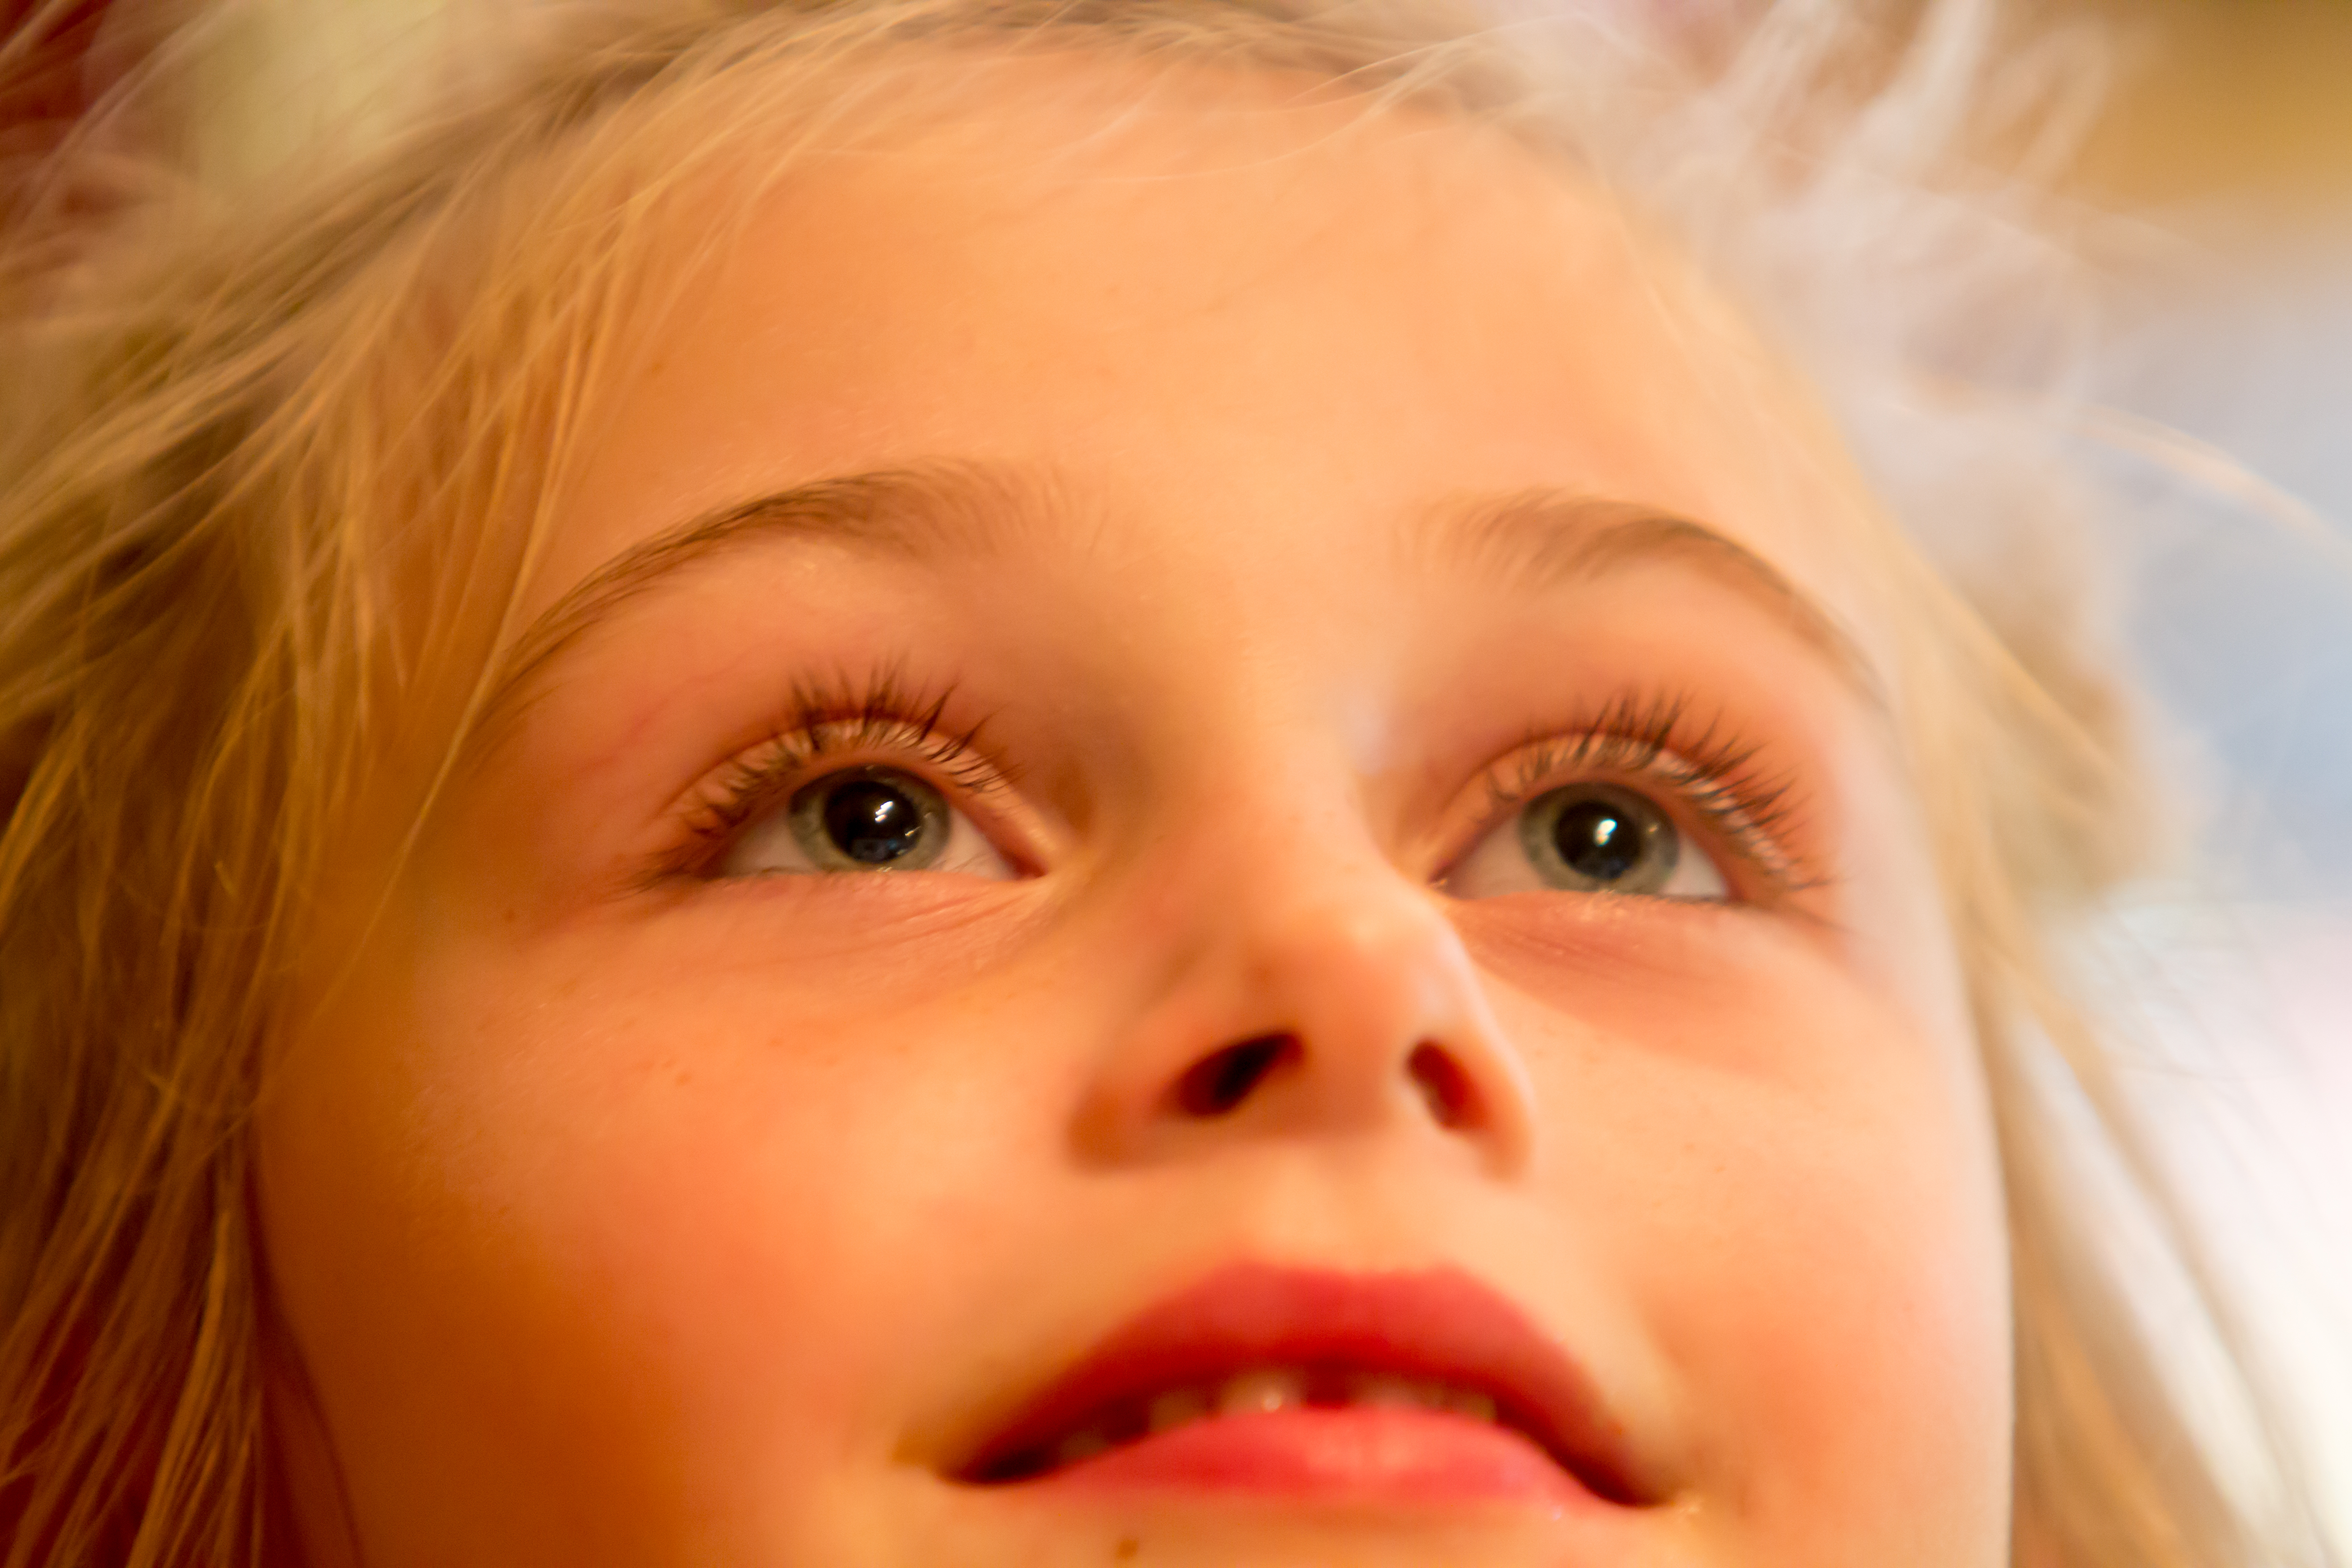 File:Closeup of a young blonde girl face looking up.jpg - Wikimedia ...